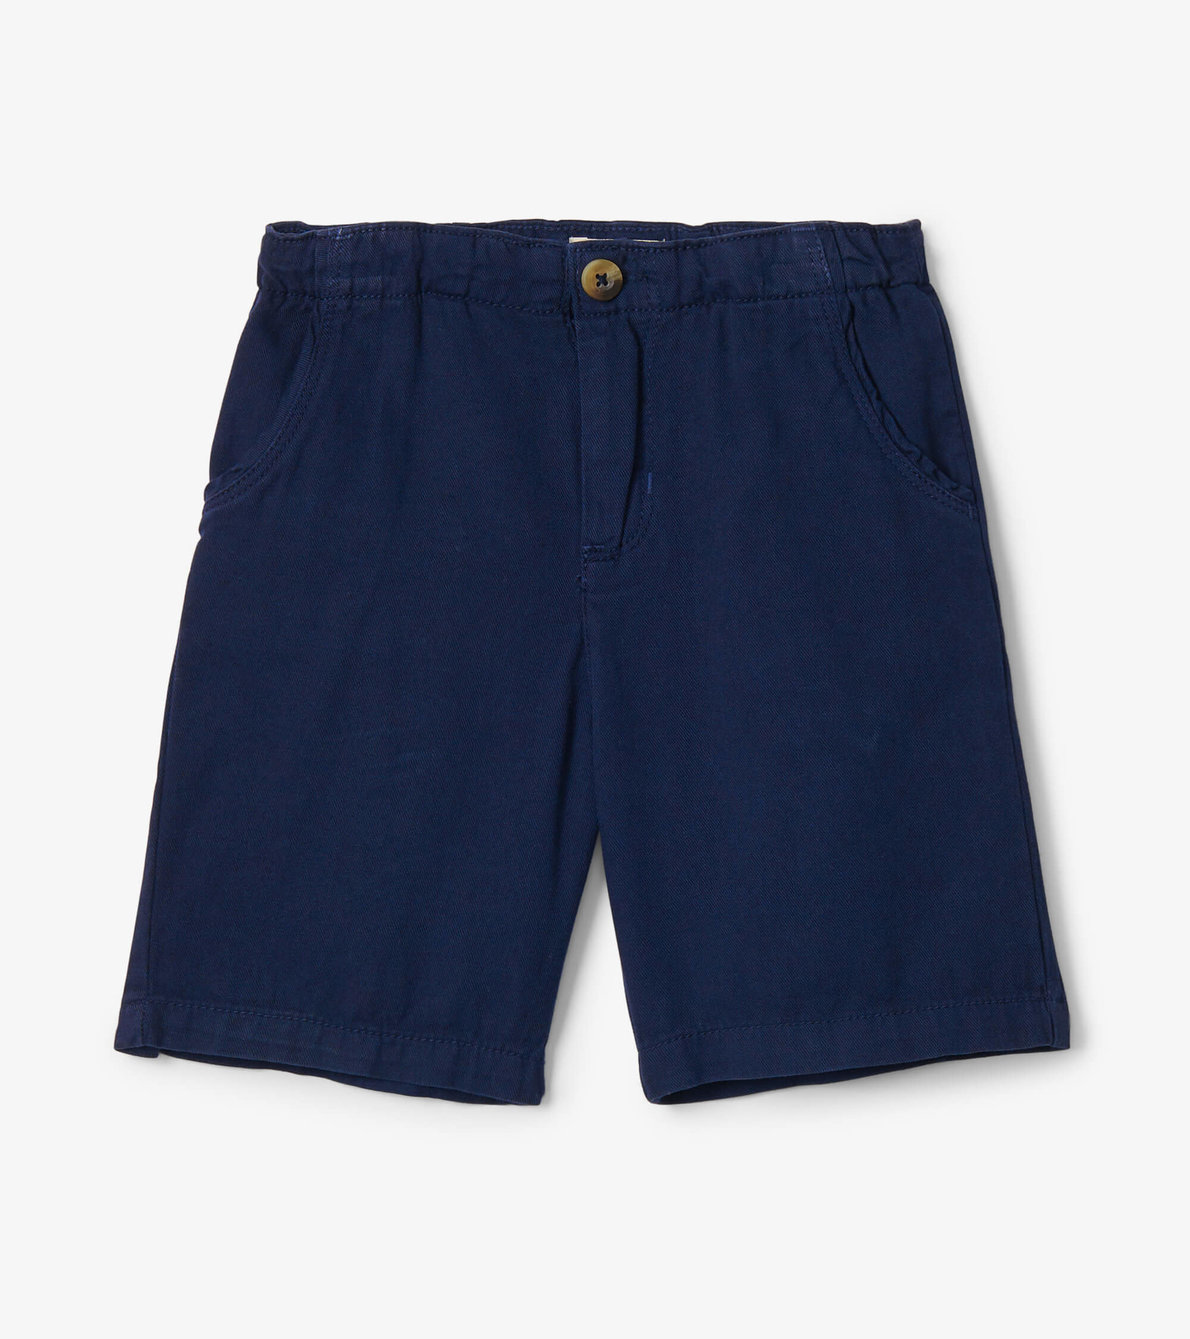 View larger image of Navy Twill Shorts